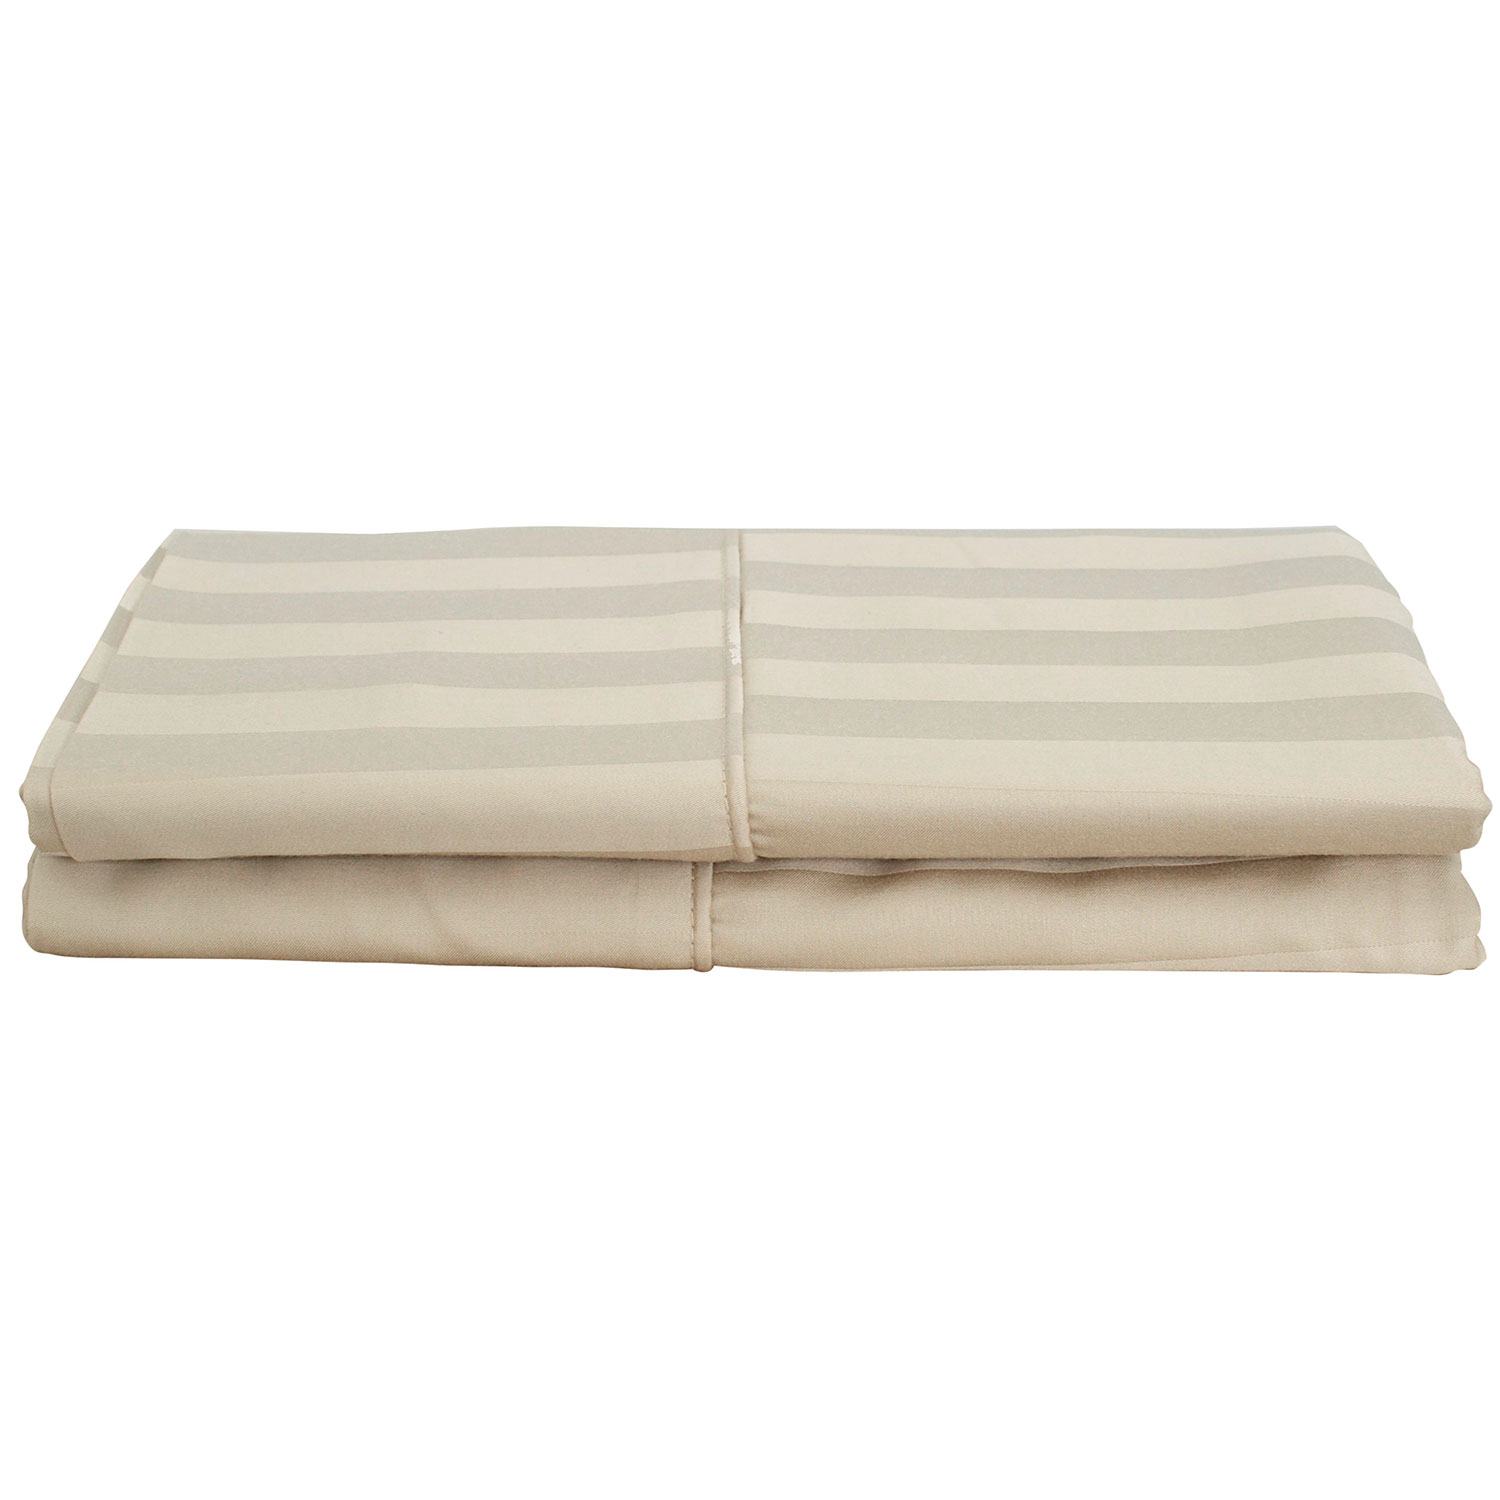 Maholi Damask Stripe Collection 310 Thread Count Pillow Case - 2 Pack - Queen - Taupe